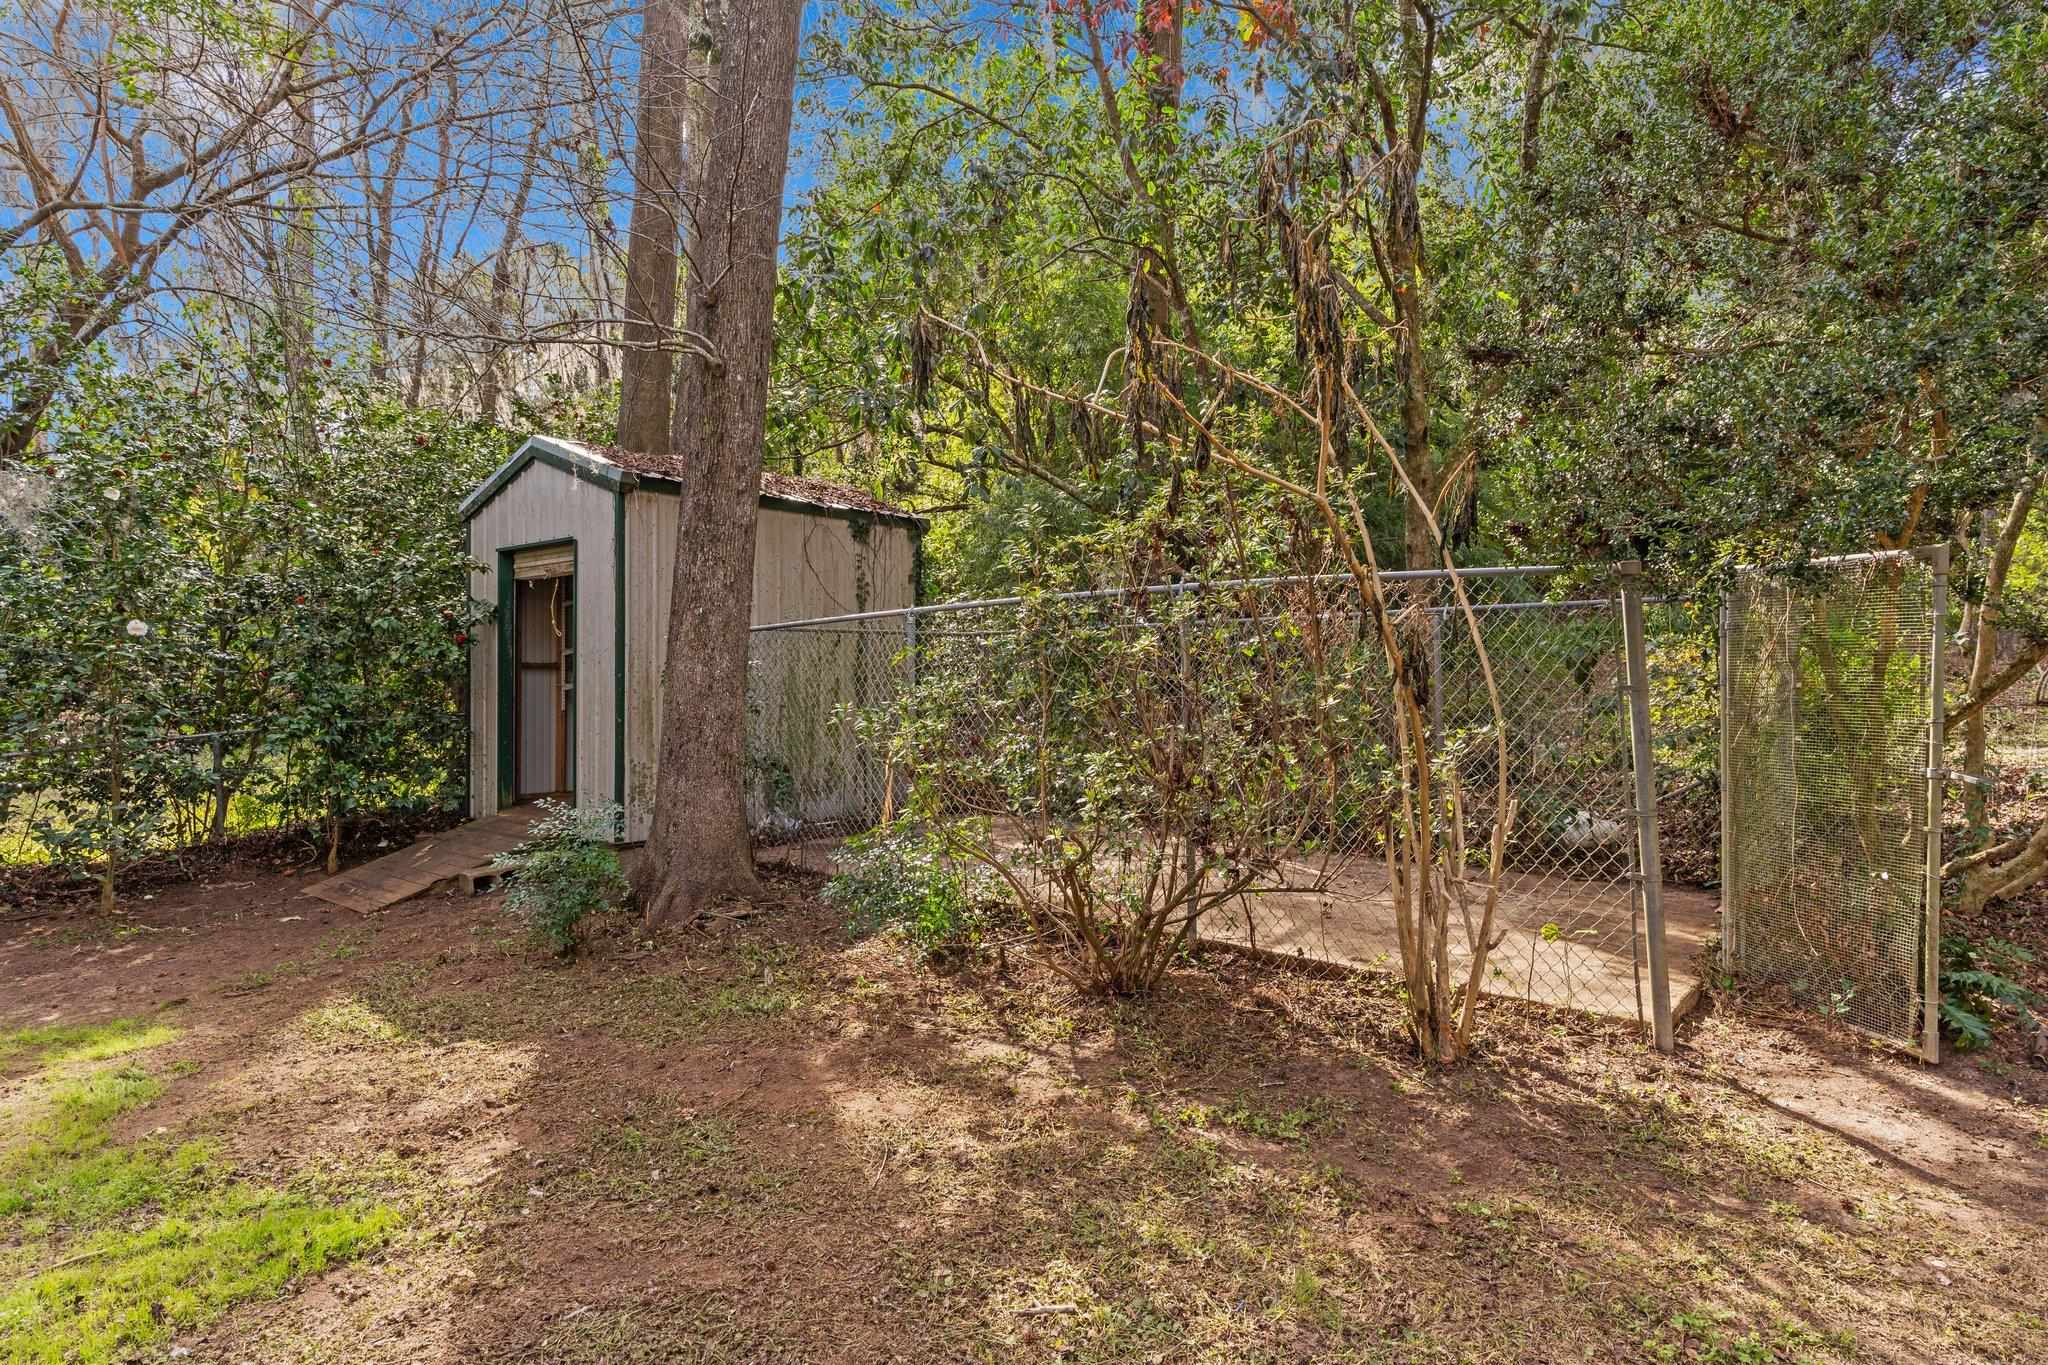 1909 Sherwood Drive,TALLAHASSEE,Florida 32303,4 Bedrooms Bedrooms,2 BathroomsBathrooms,Detached single family,1909 Sherwood Drive,370301